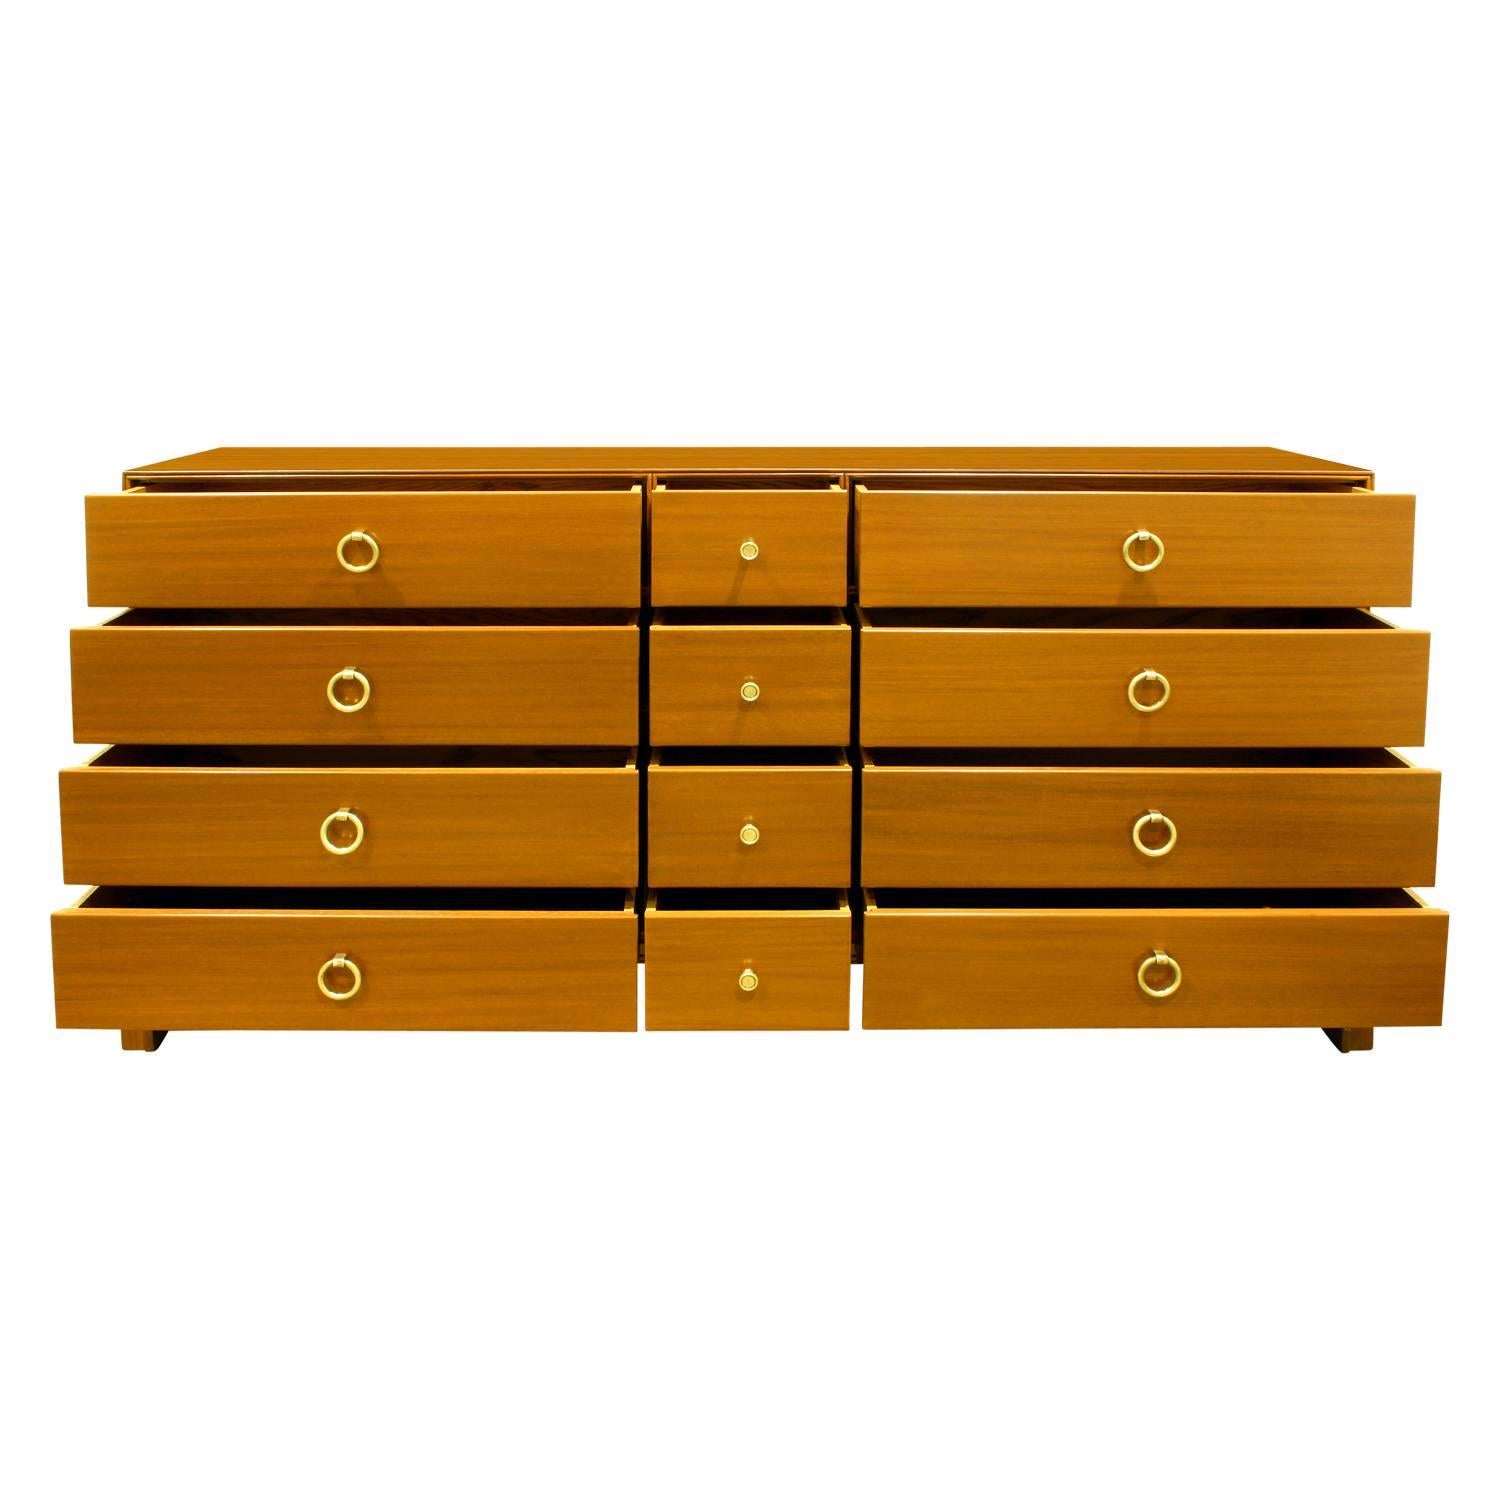 Chest of drawers TP-104 with 12 drawers in mahogany with brass ring pulls by Tommi Parzinger for Charak Modern, American, 1940s (signed in drawer, “Charak Modern”) This is an elegant Parzinger design.